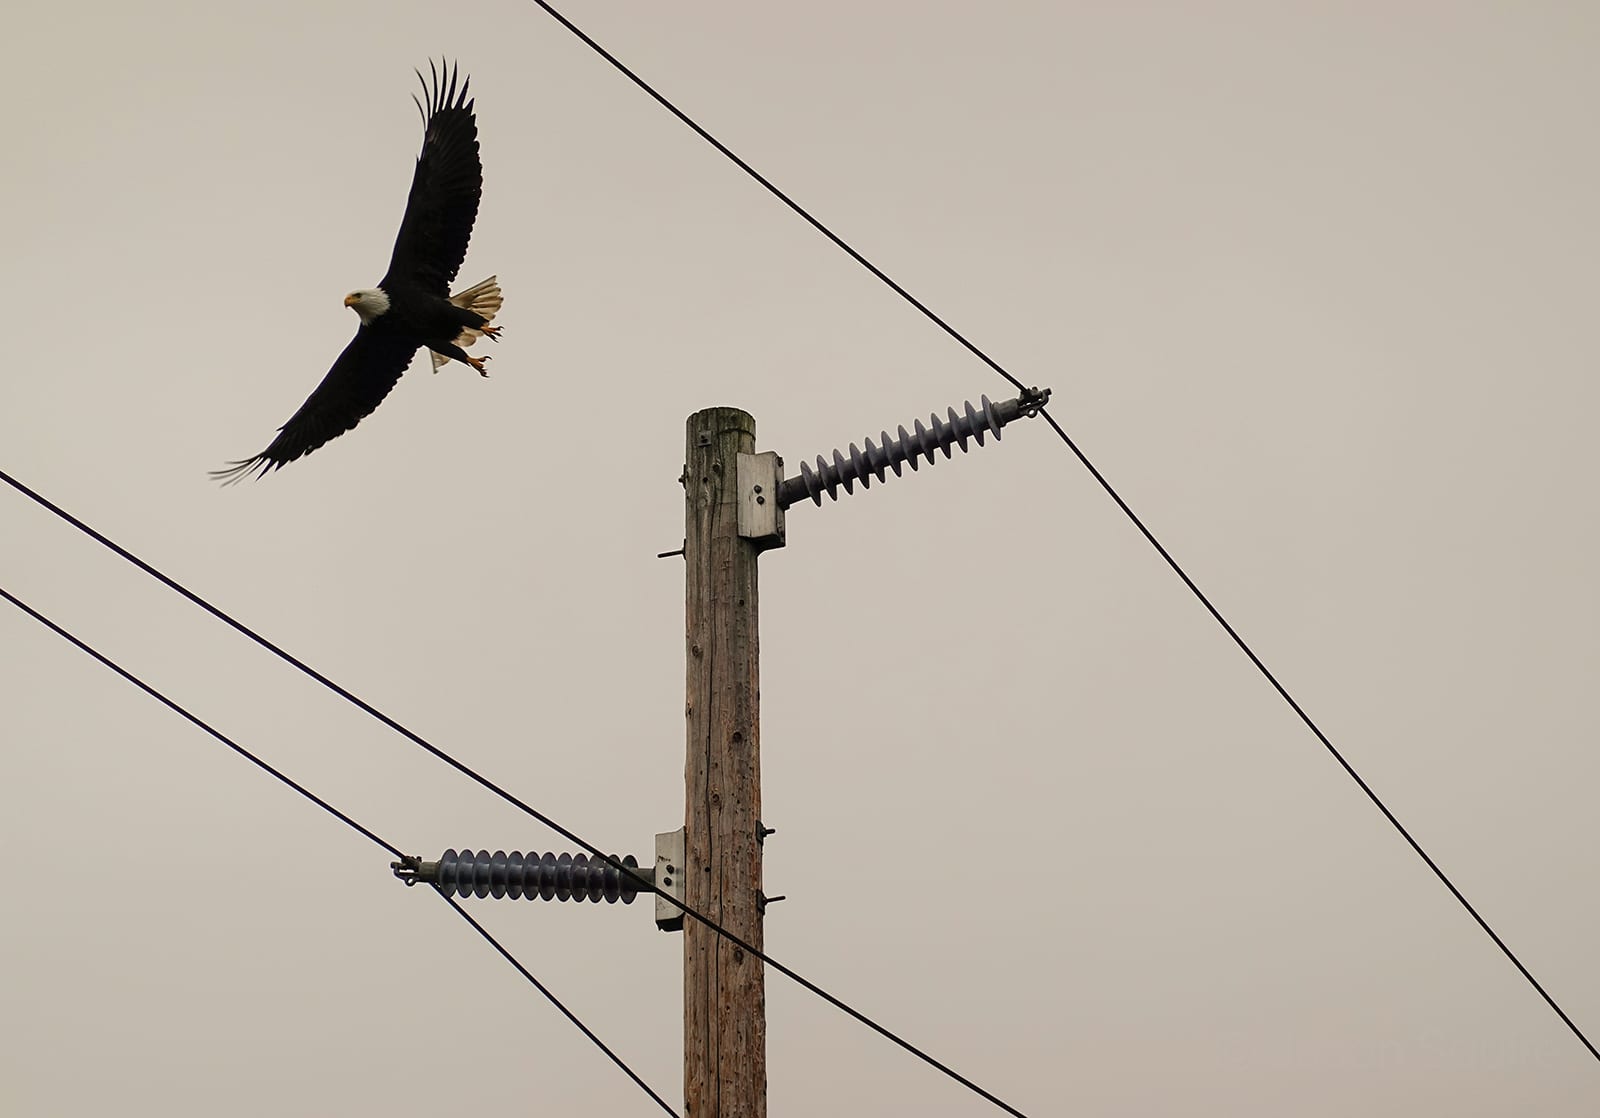 Eagle flying near power lines